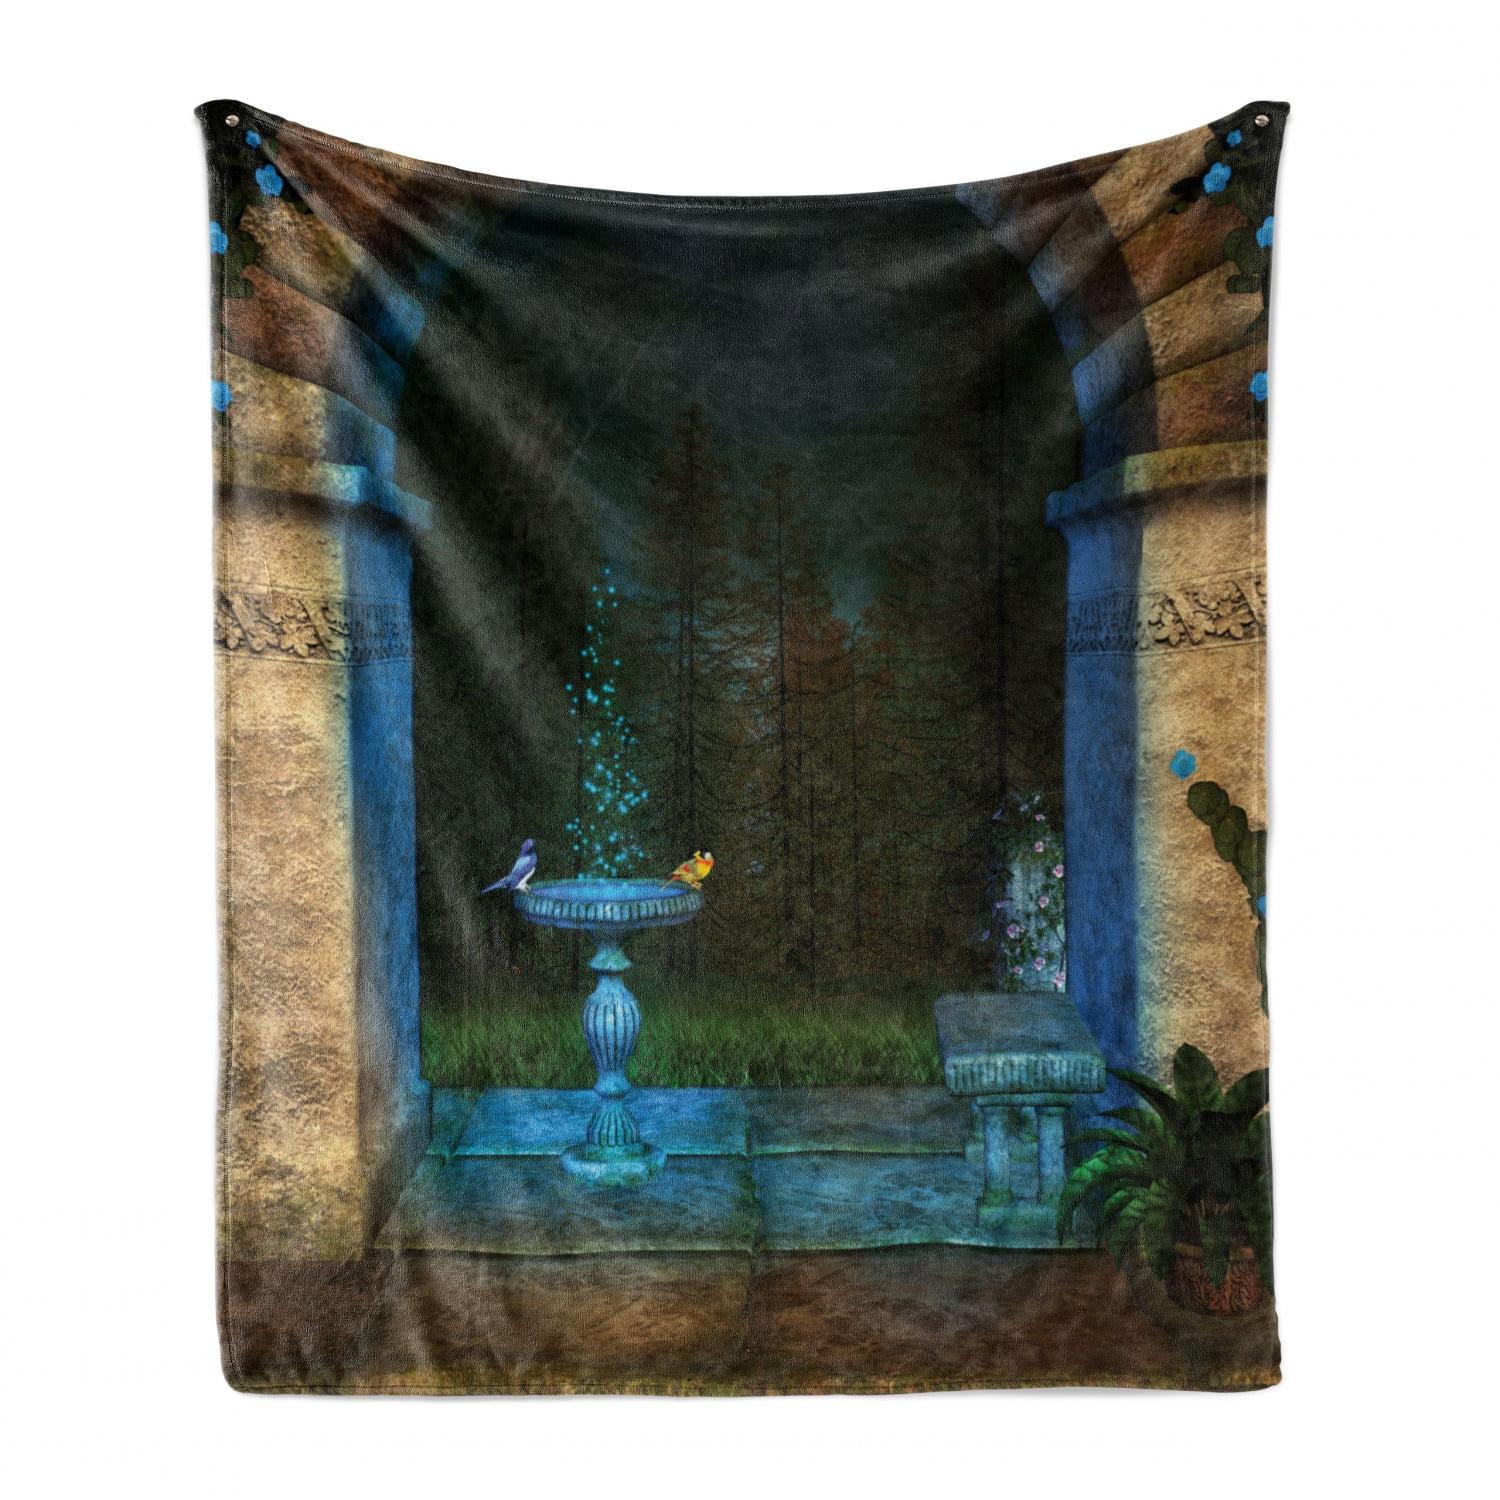 Cozy Plush for Indoor and Outdoor Use 50 x 60 Blue Grey Green Forest Landscape from Archway Birds on Fountain Illustration Ambesonne Gothic Soft Flannel Fleece Throw Blanket 